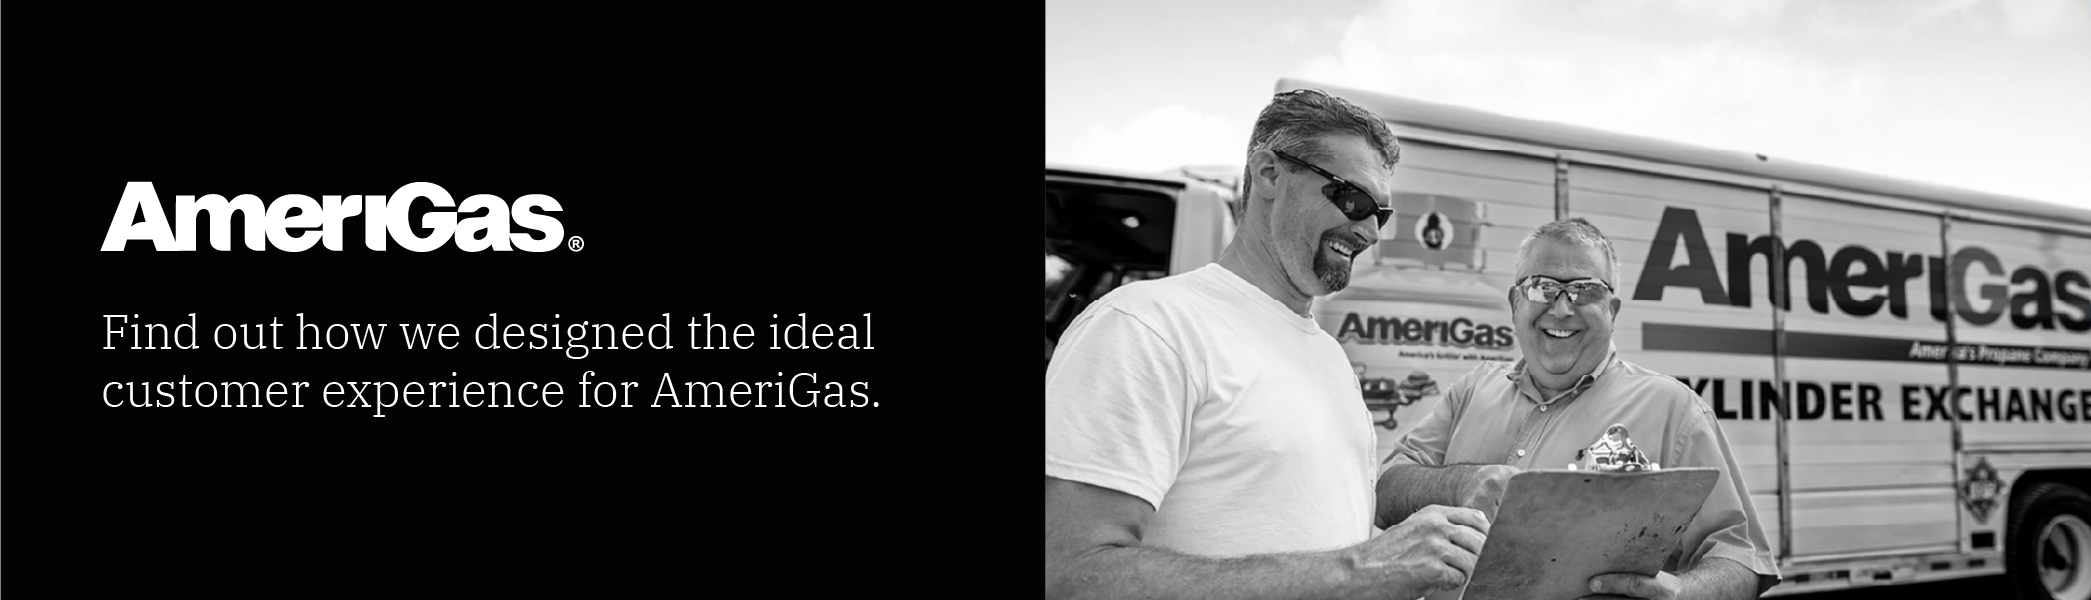 Find out how we designed the ideal customer experience for AmeriGas.